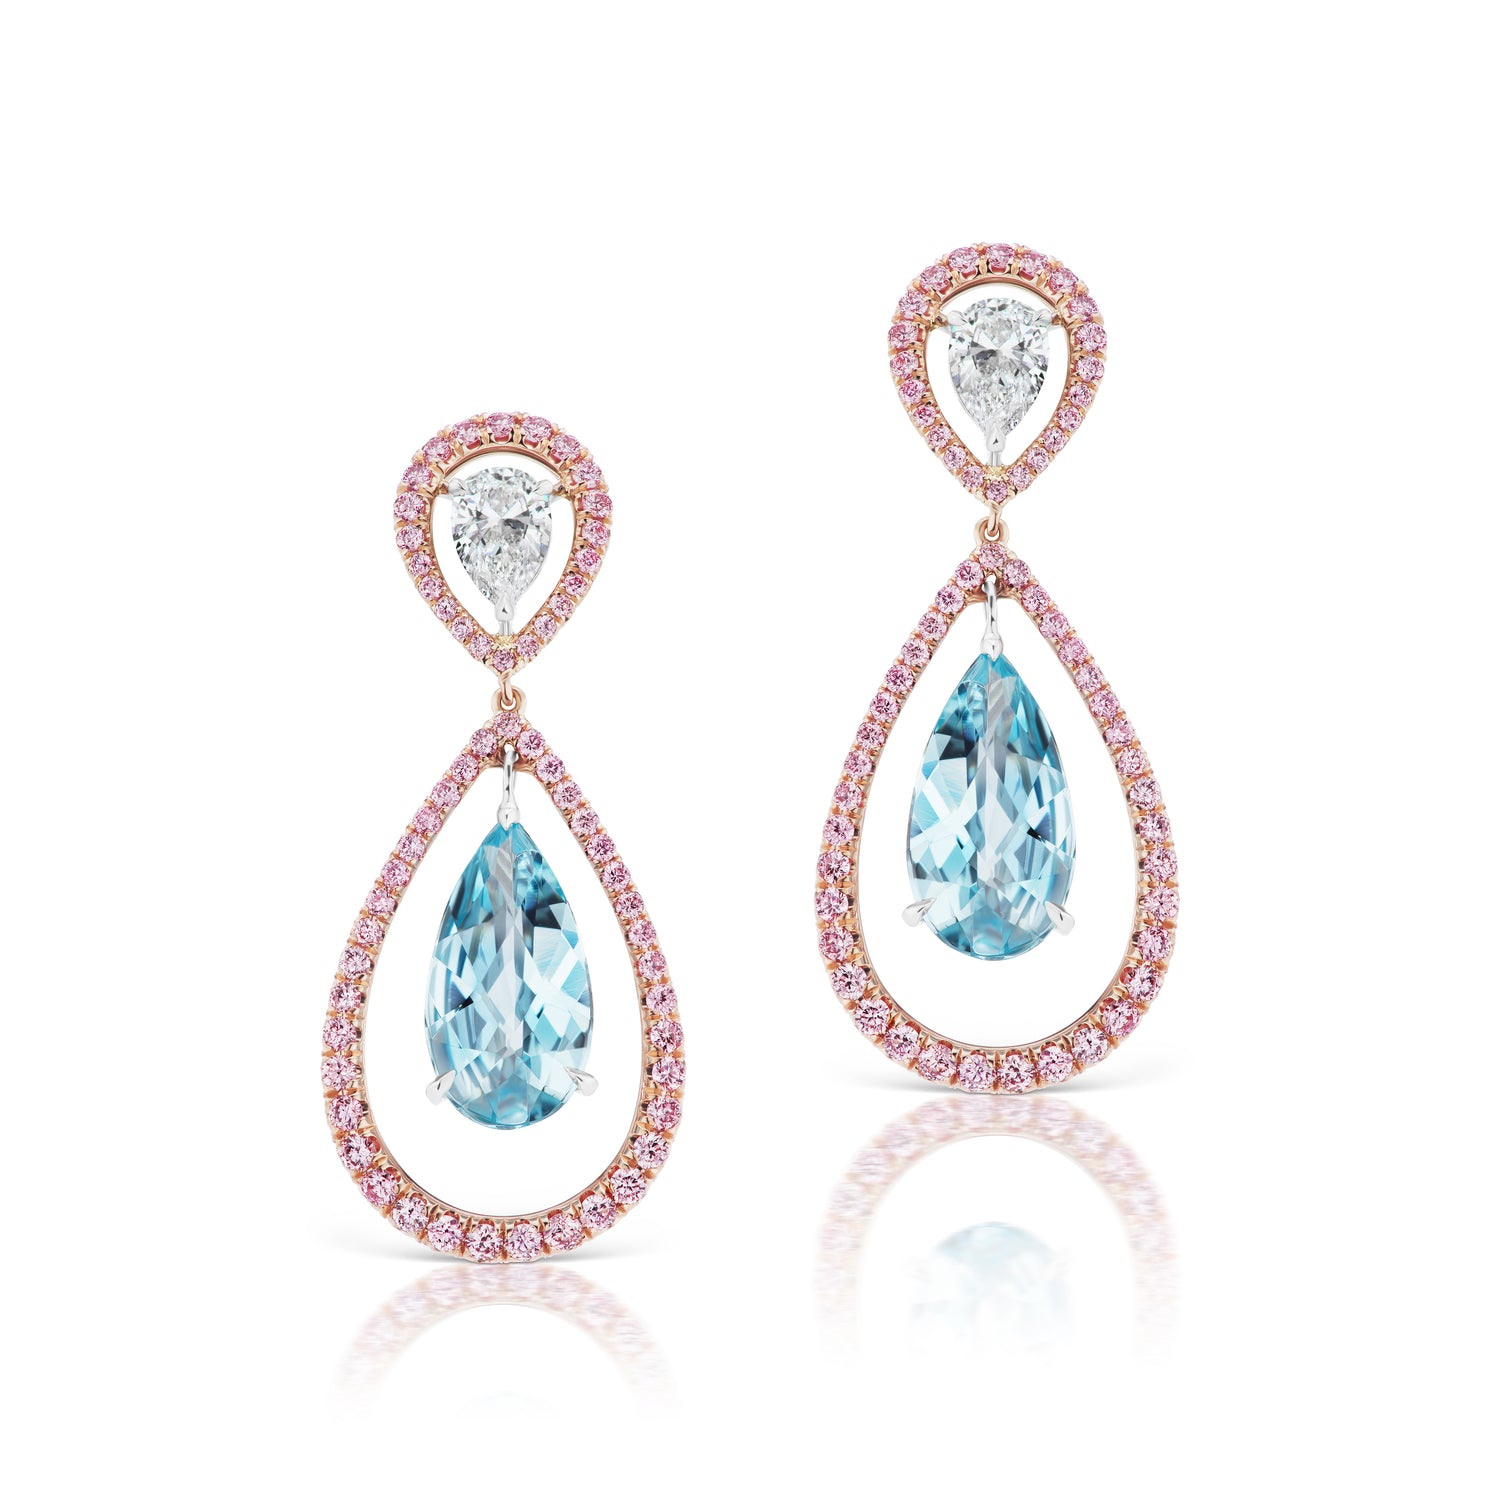 Close up view of the Aquamarine Drop Earrings. Featuring round pink diamonds, two pear shaped white diamonds, and two aquamarine diamonds set in pink gold and white gold.